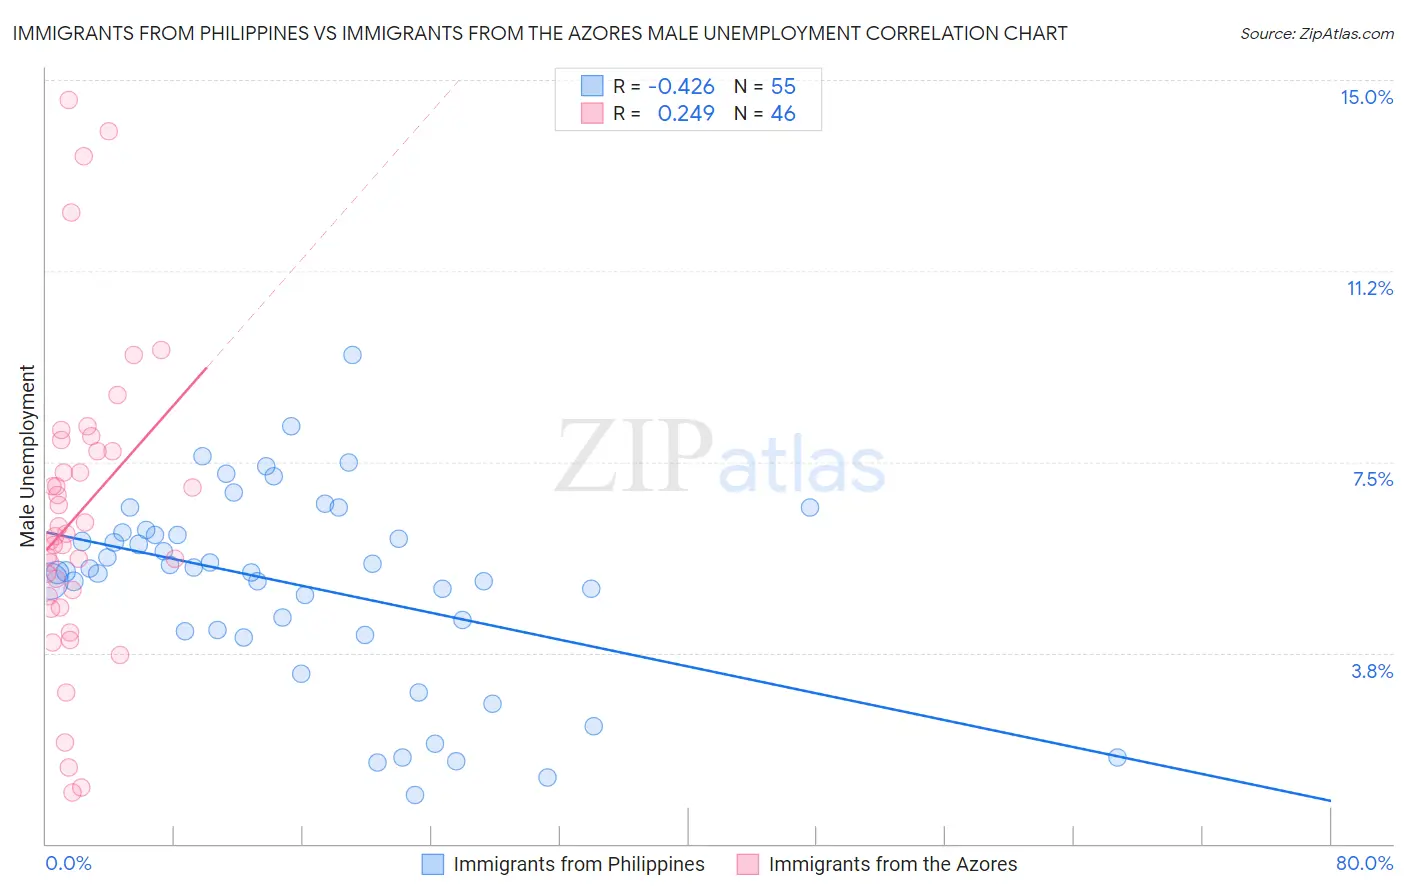 Immigrants from Philippines vs Immigrants from the Azores Male Unemployment